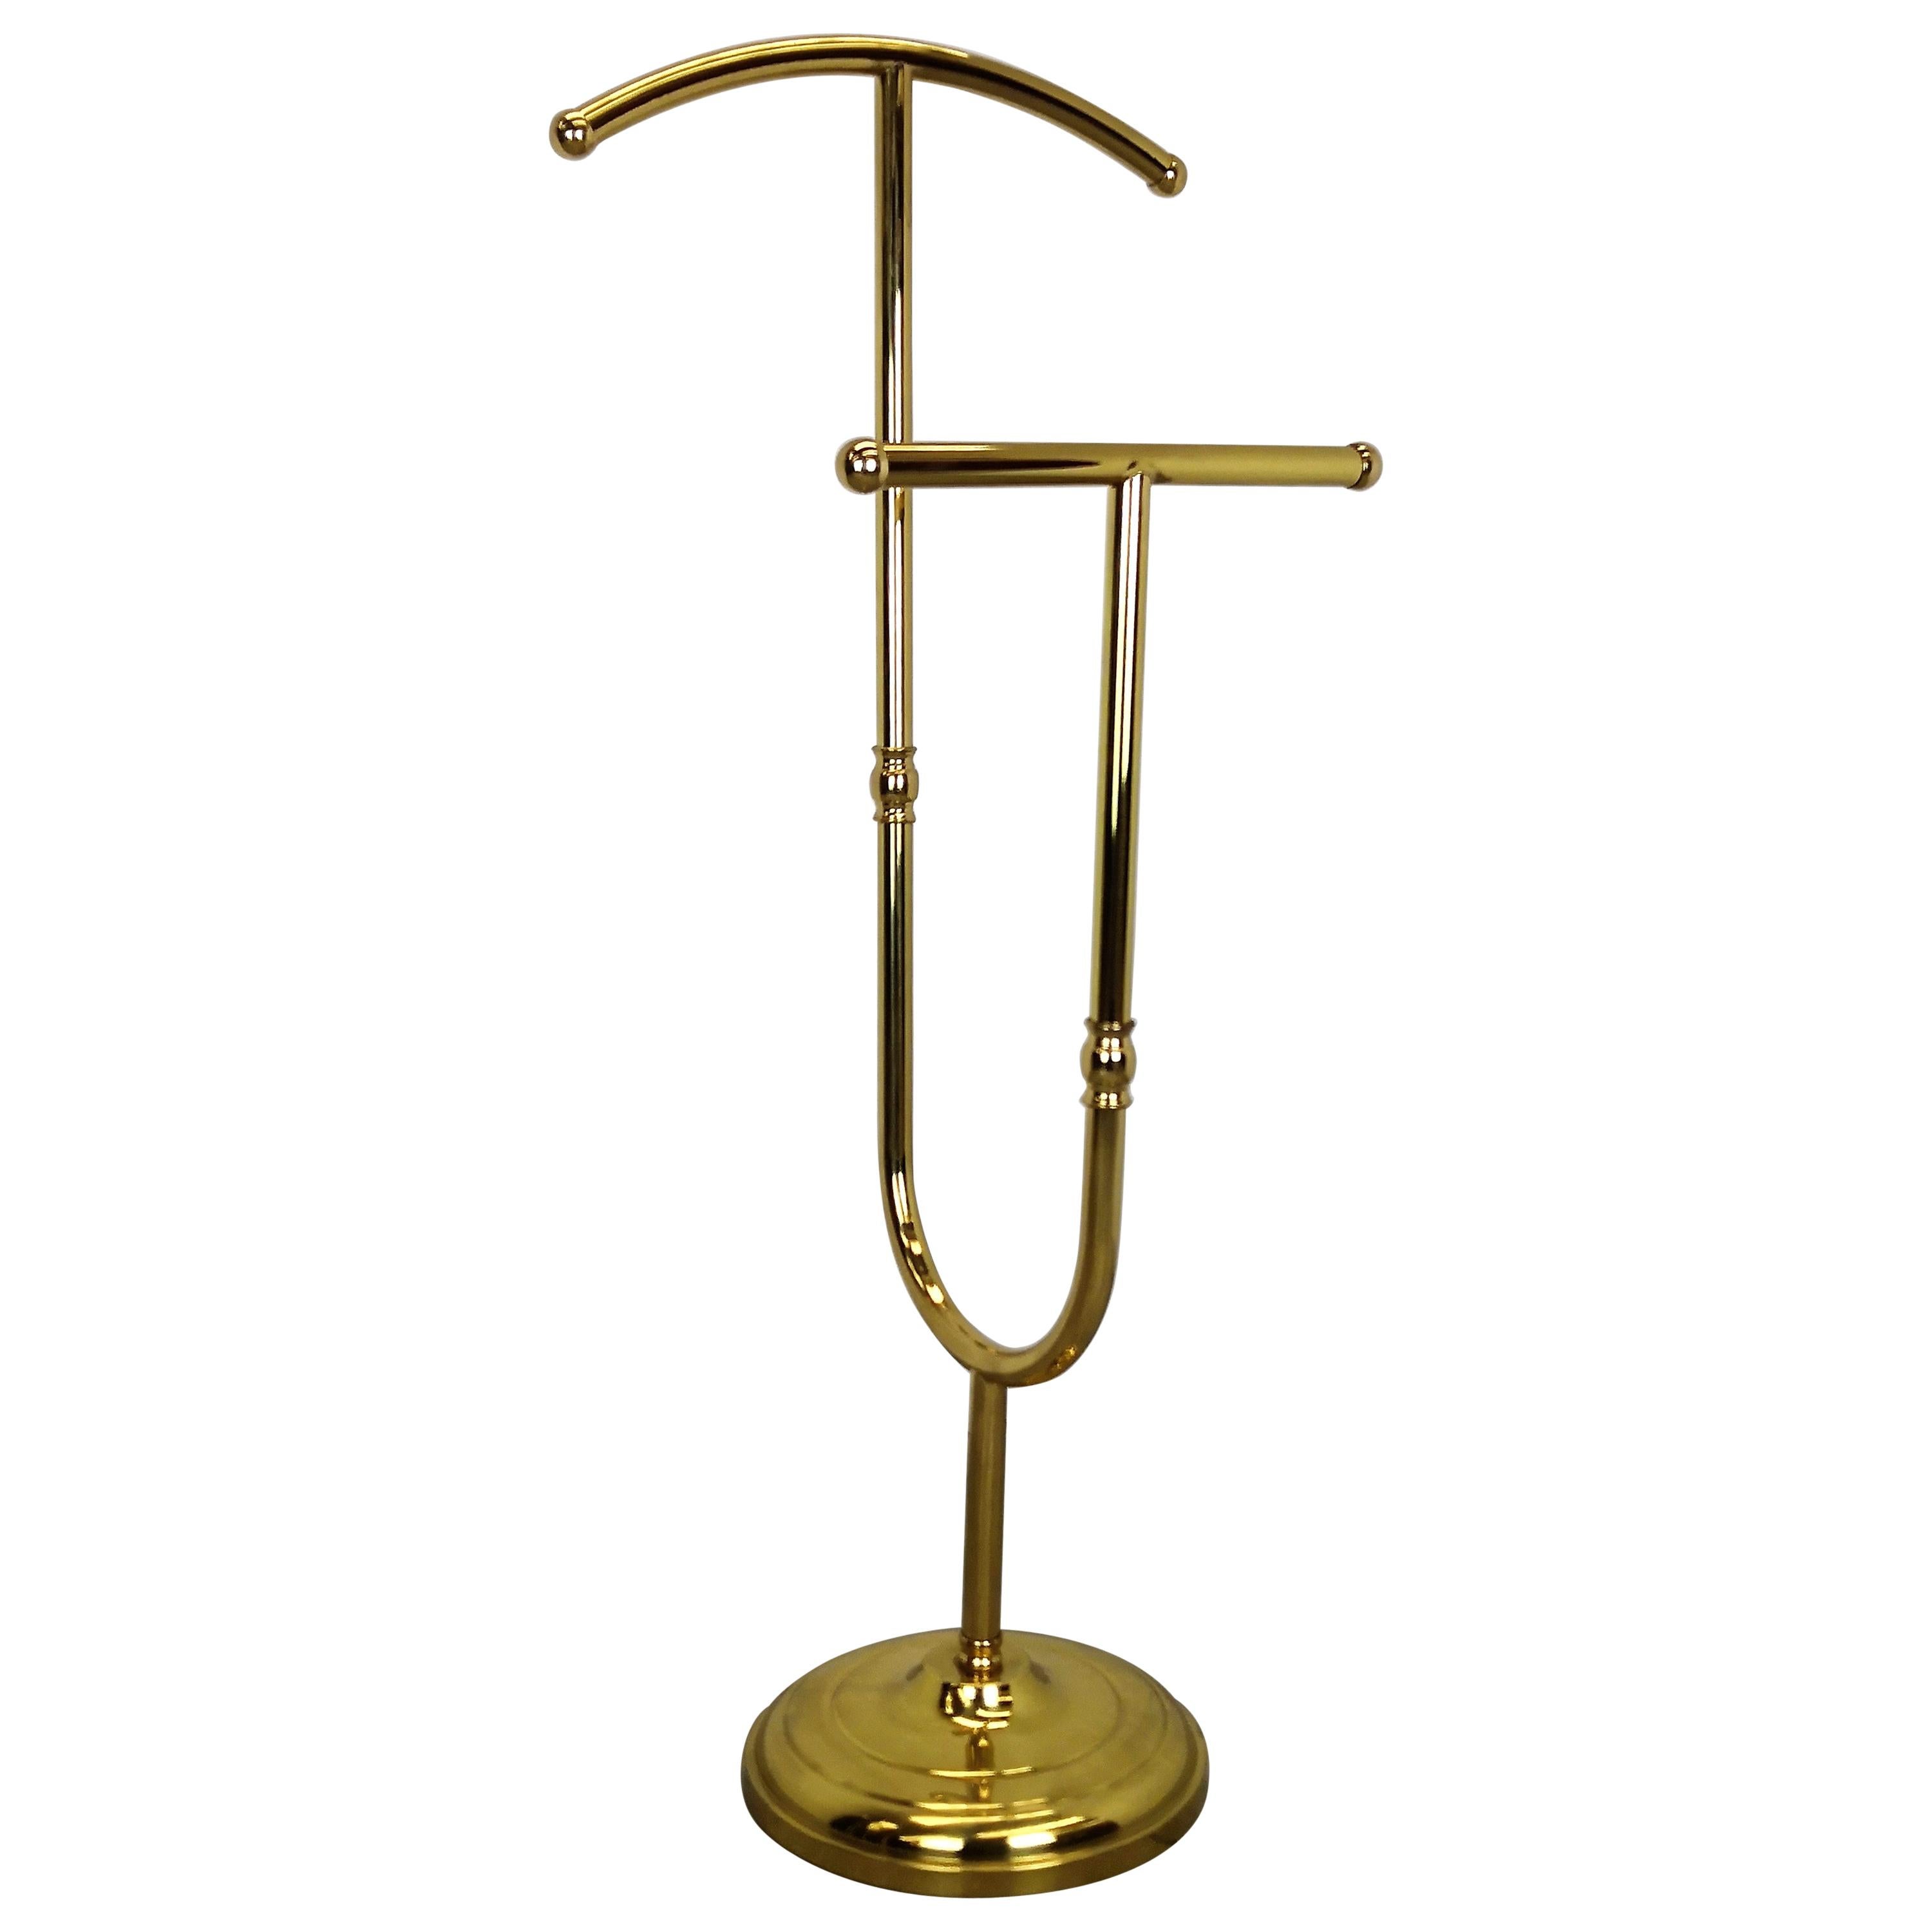 1980s Italian Midcentury Hollywood Regency Neoclassical Brass Valet Stand